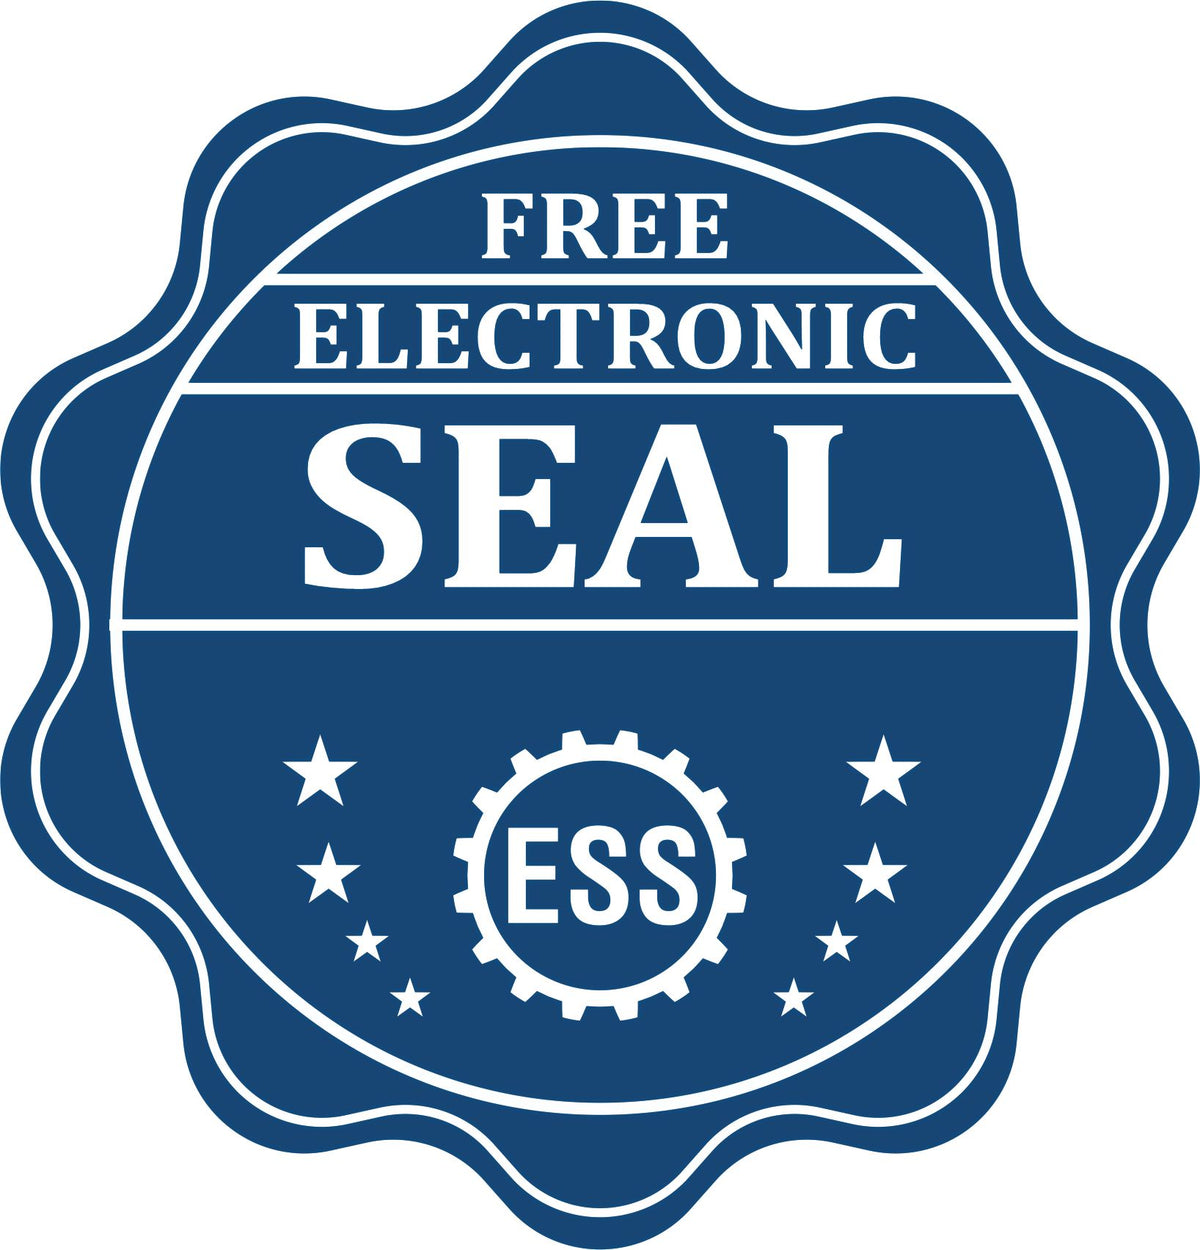 A badge showing a free electronic seal for the Hybrid Idaho Landscape Architect Seal with stars and the ESS gear on the emblem.